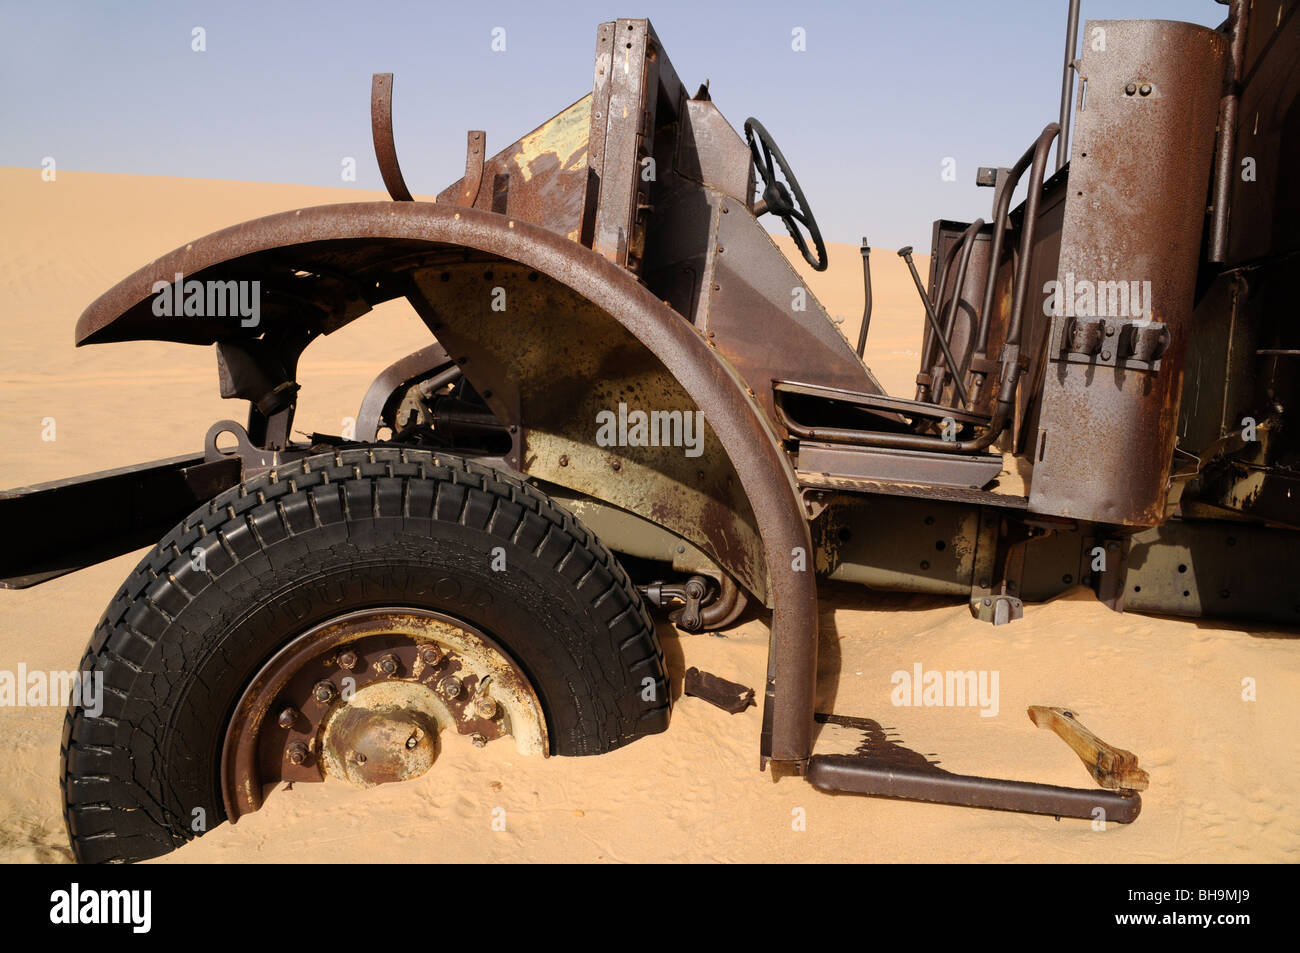 An old military vehicle of the Long Range Desert Group, an elite World War Two British army unit, in the Western Desert of North Africa, Egypt. Stock Photo